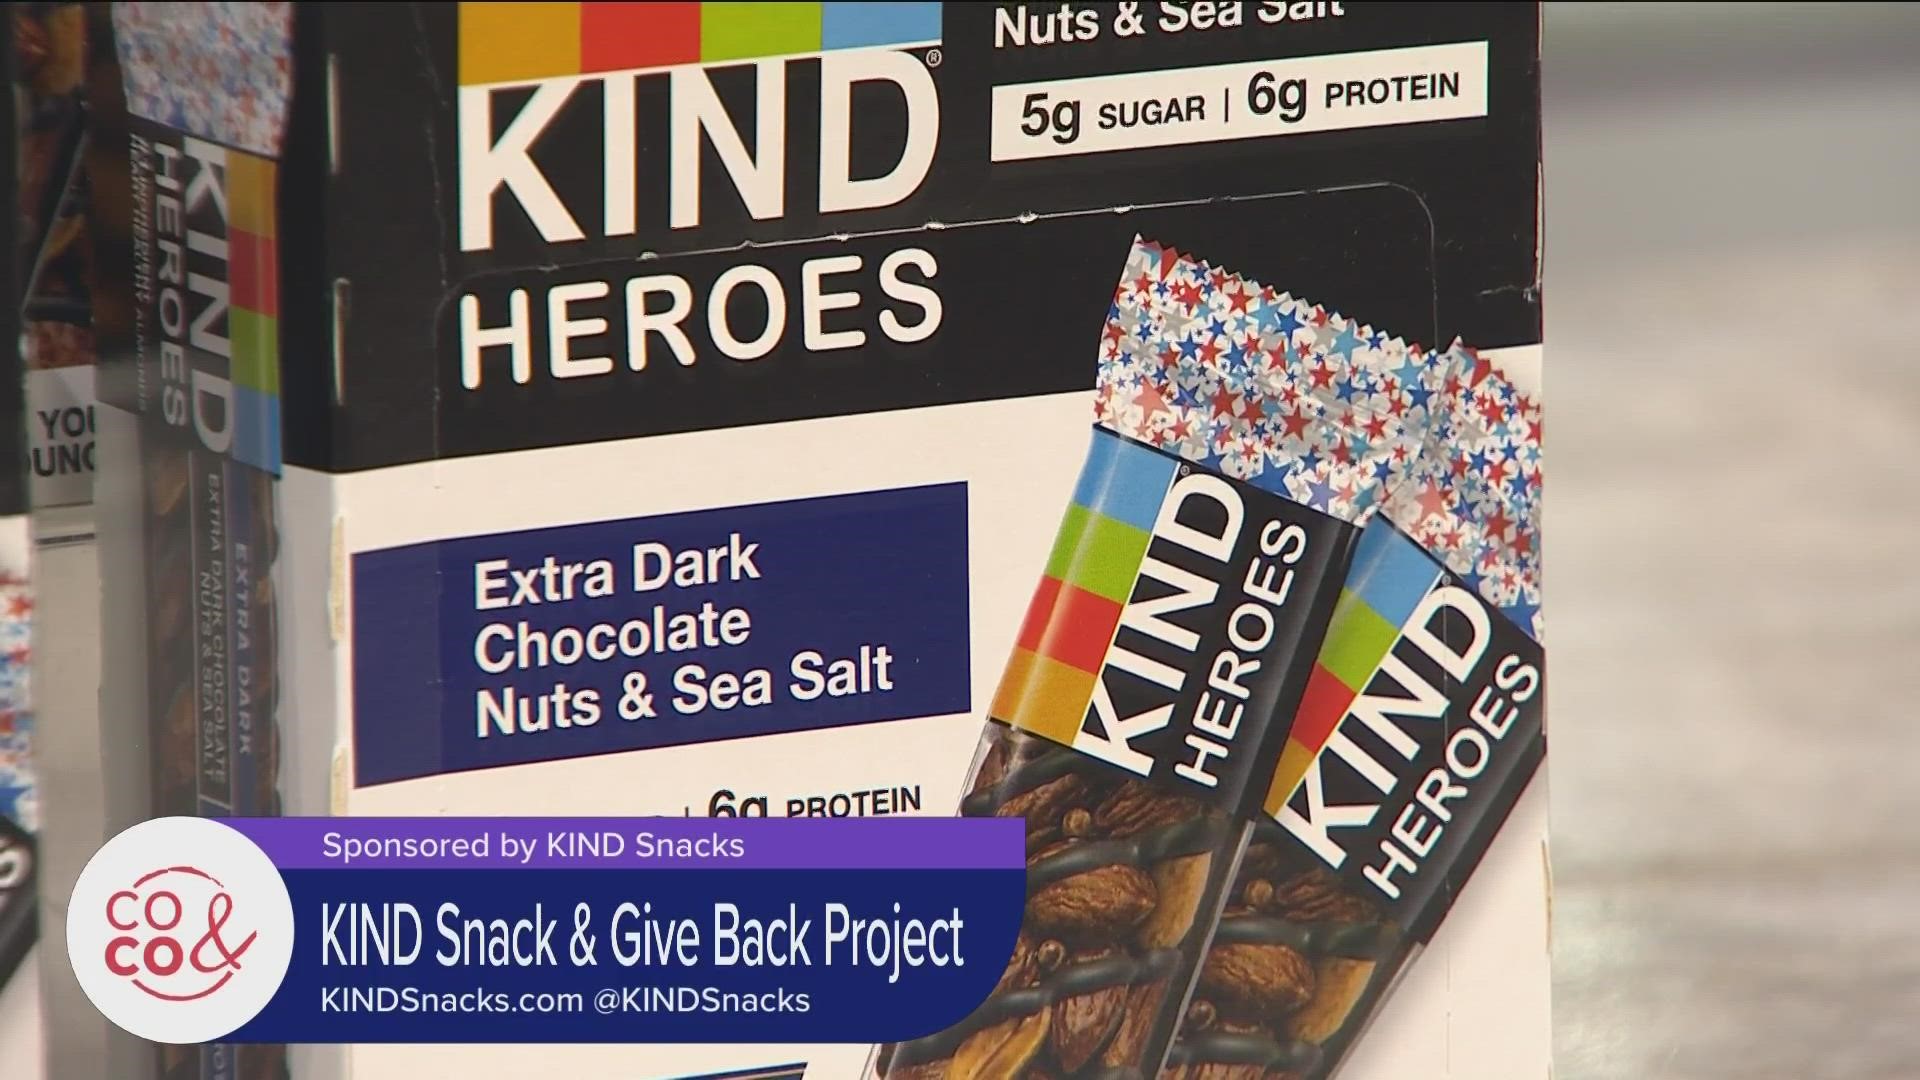 Find Kind Bars at your local King Soopers, your home for Optimum Wellness. **PAID CONTENT**